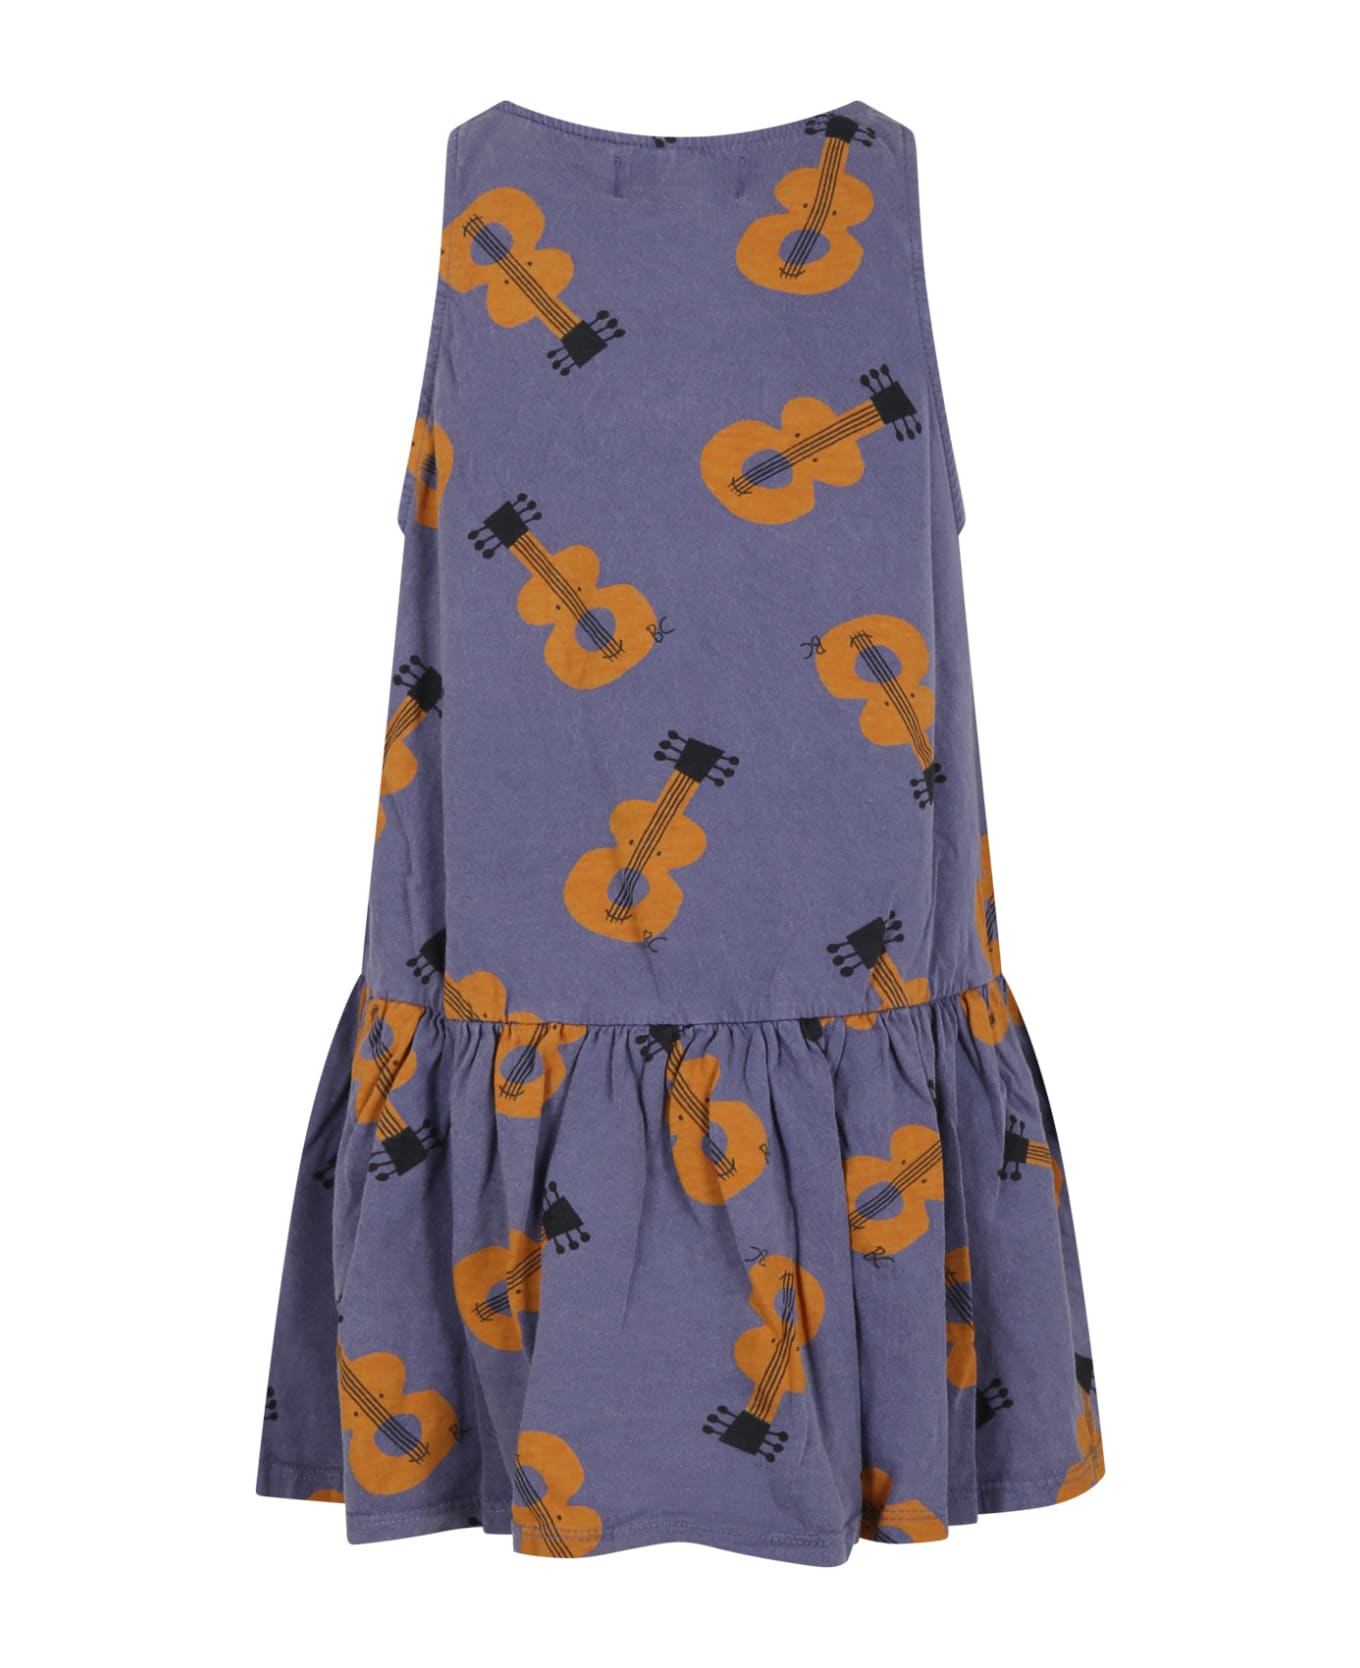 Bobo Choses Purple Dress For Girl With Guitars - Violet ワンピース＆ドレス